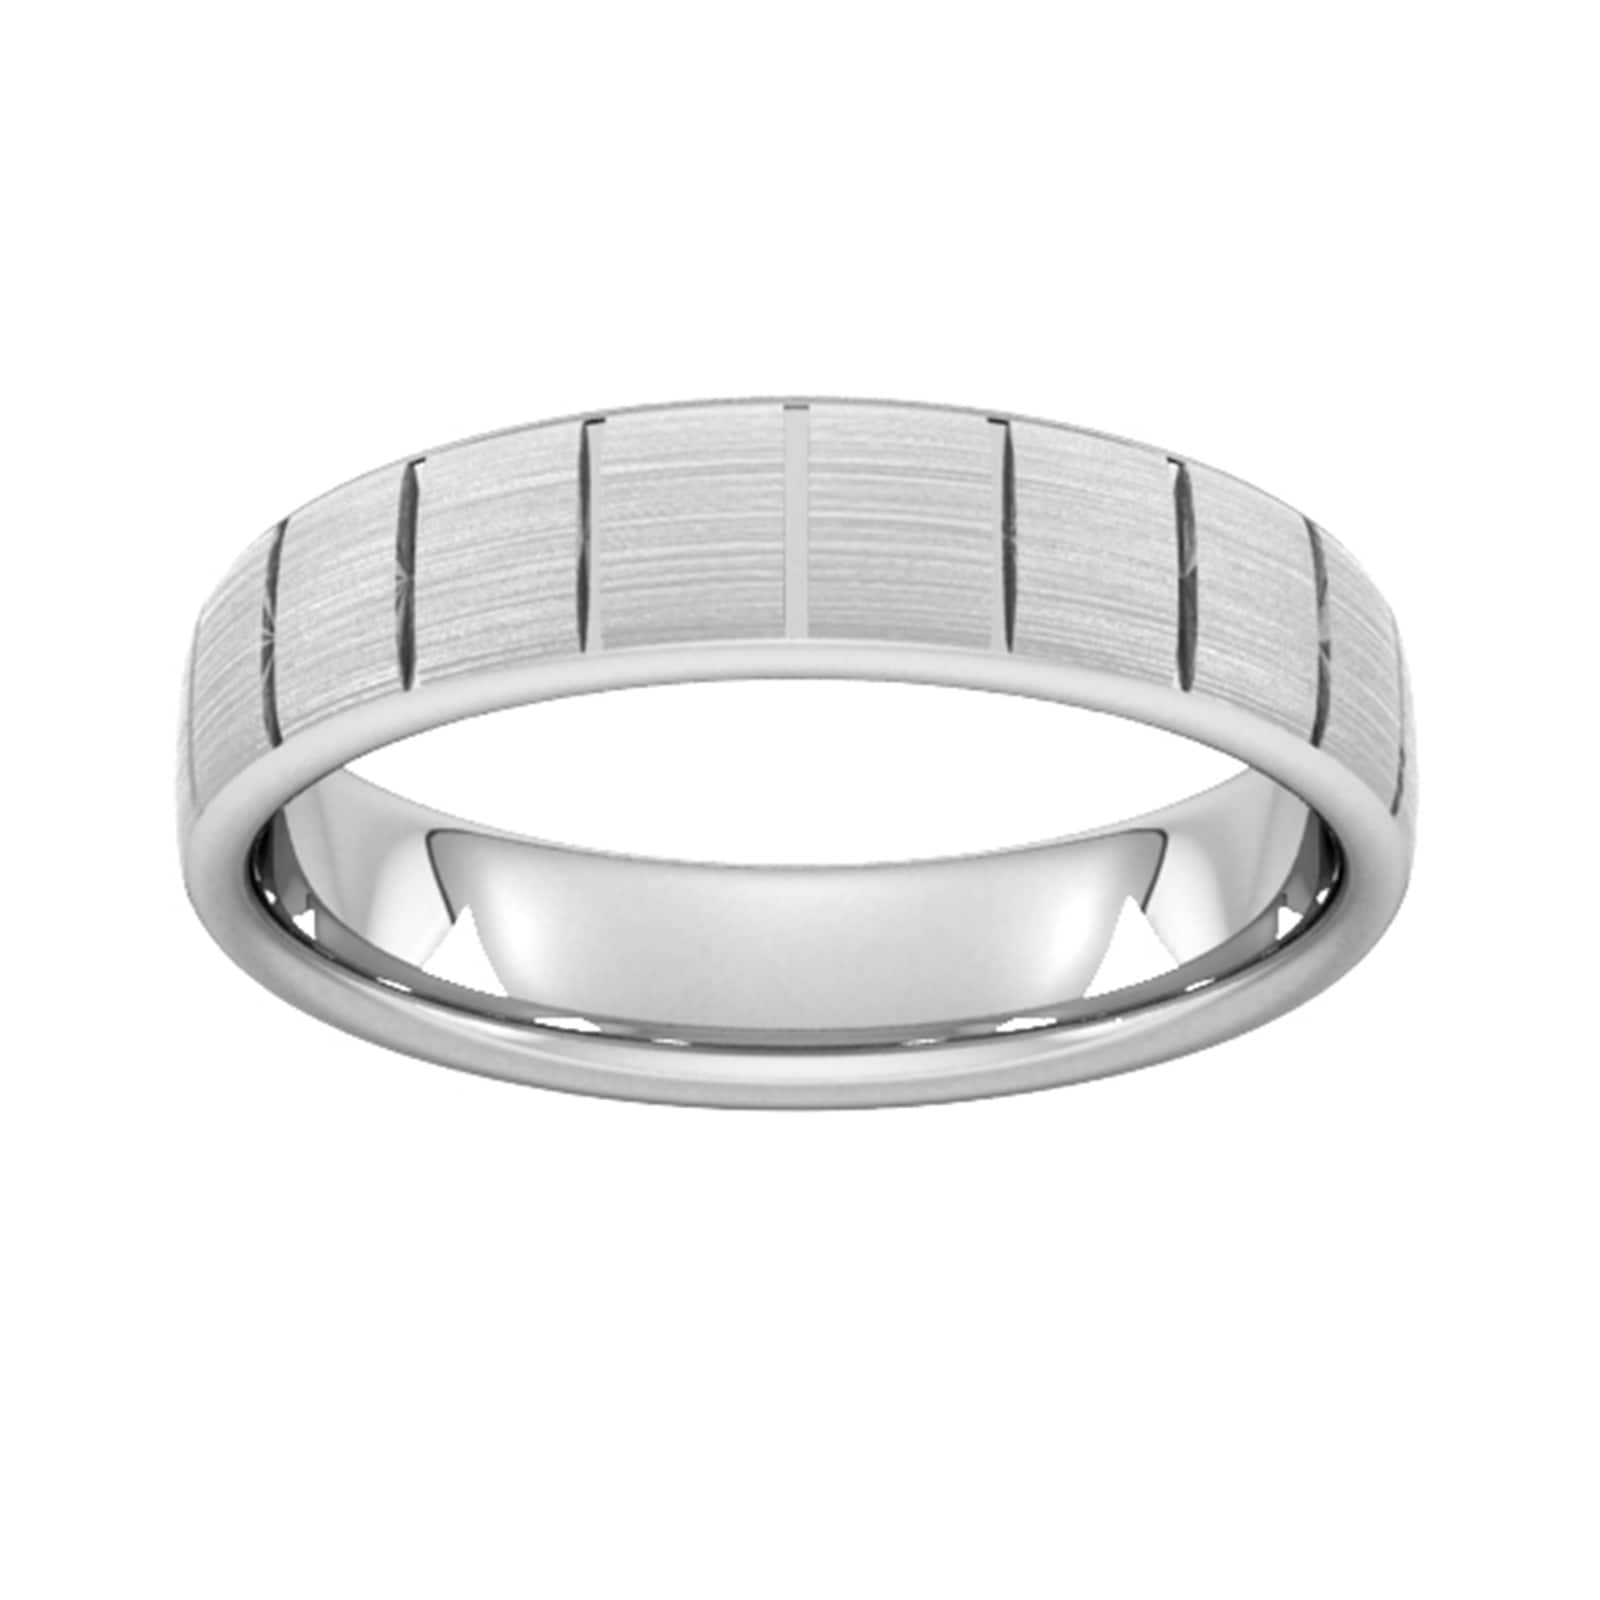 4mm D Shape Heavy Vertical Lines Wedding Ring In 9 Carat White Gold - Ring Size Q